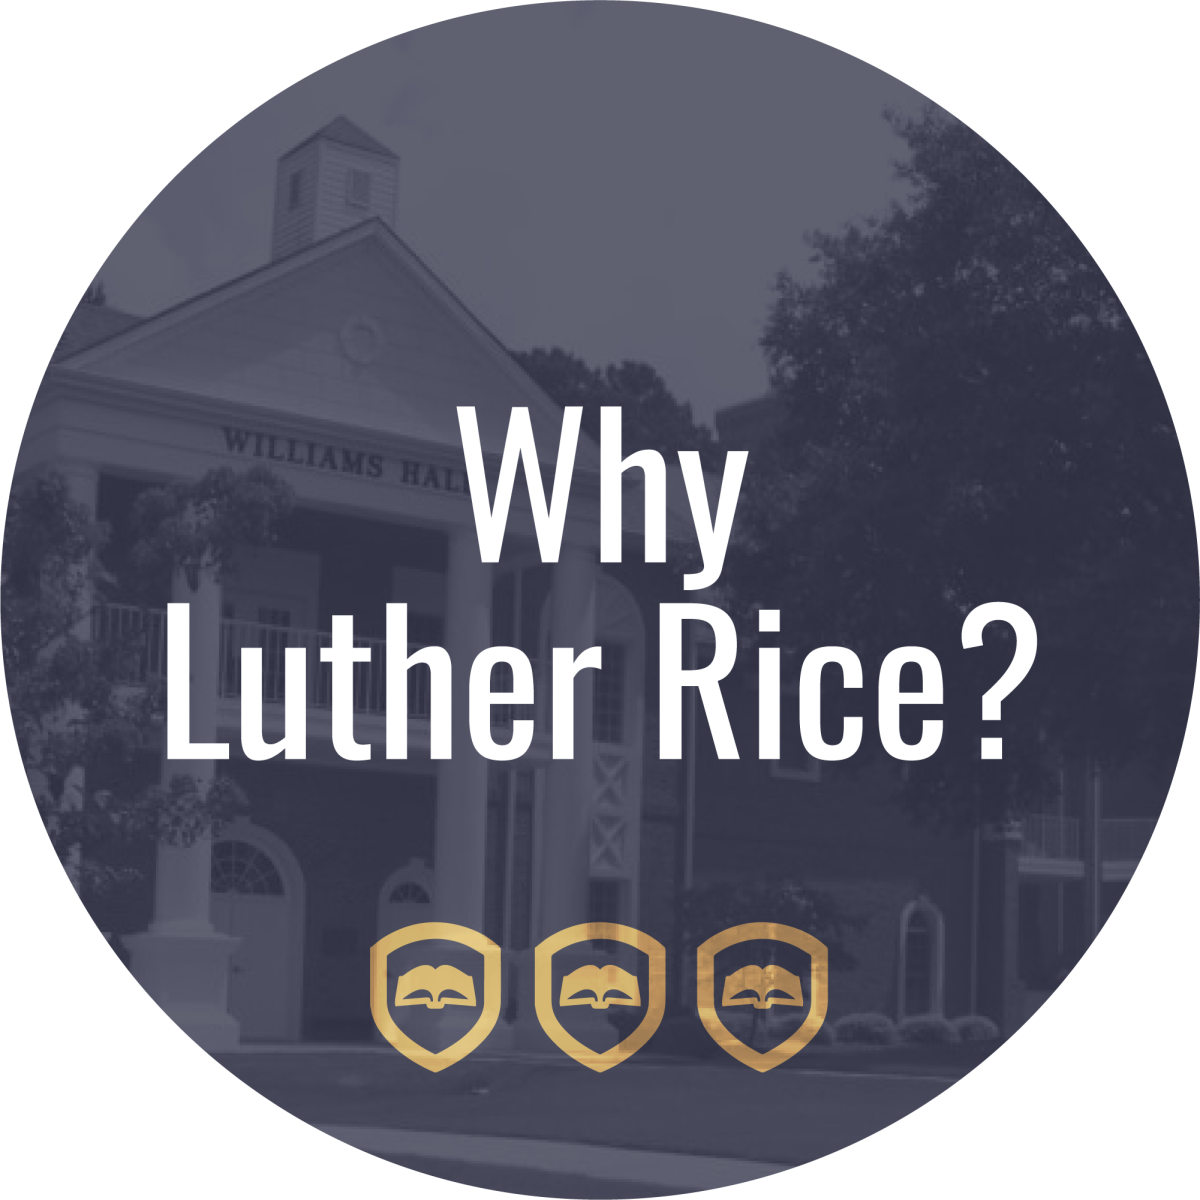 why luther rice?